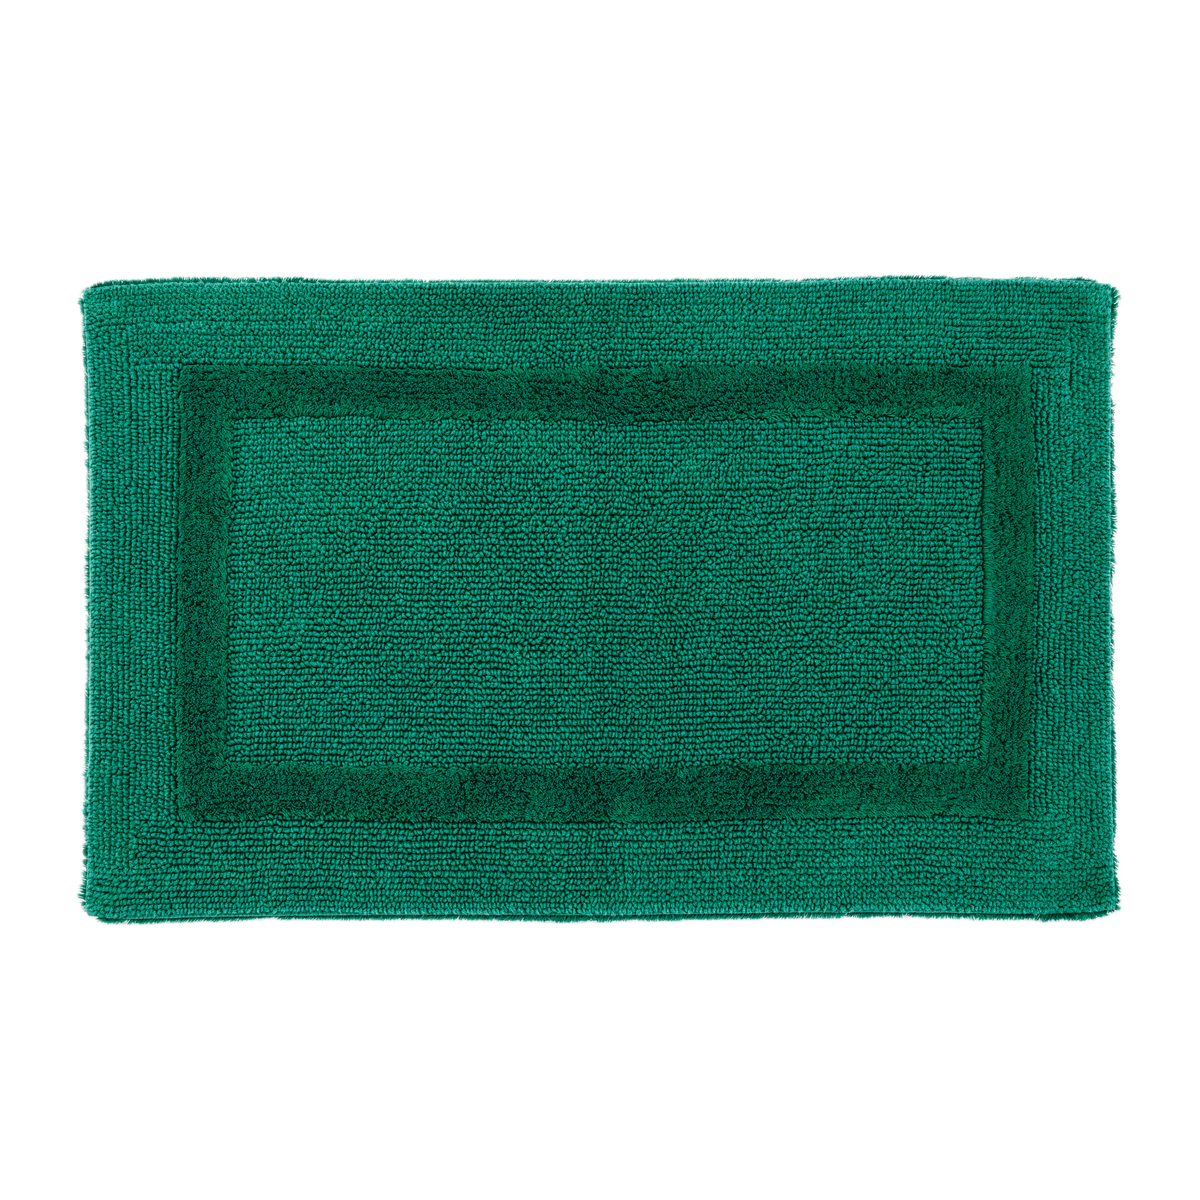 Abyss Habidecor Reversible Bath Rug in British Green Color